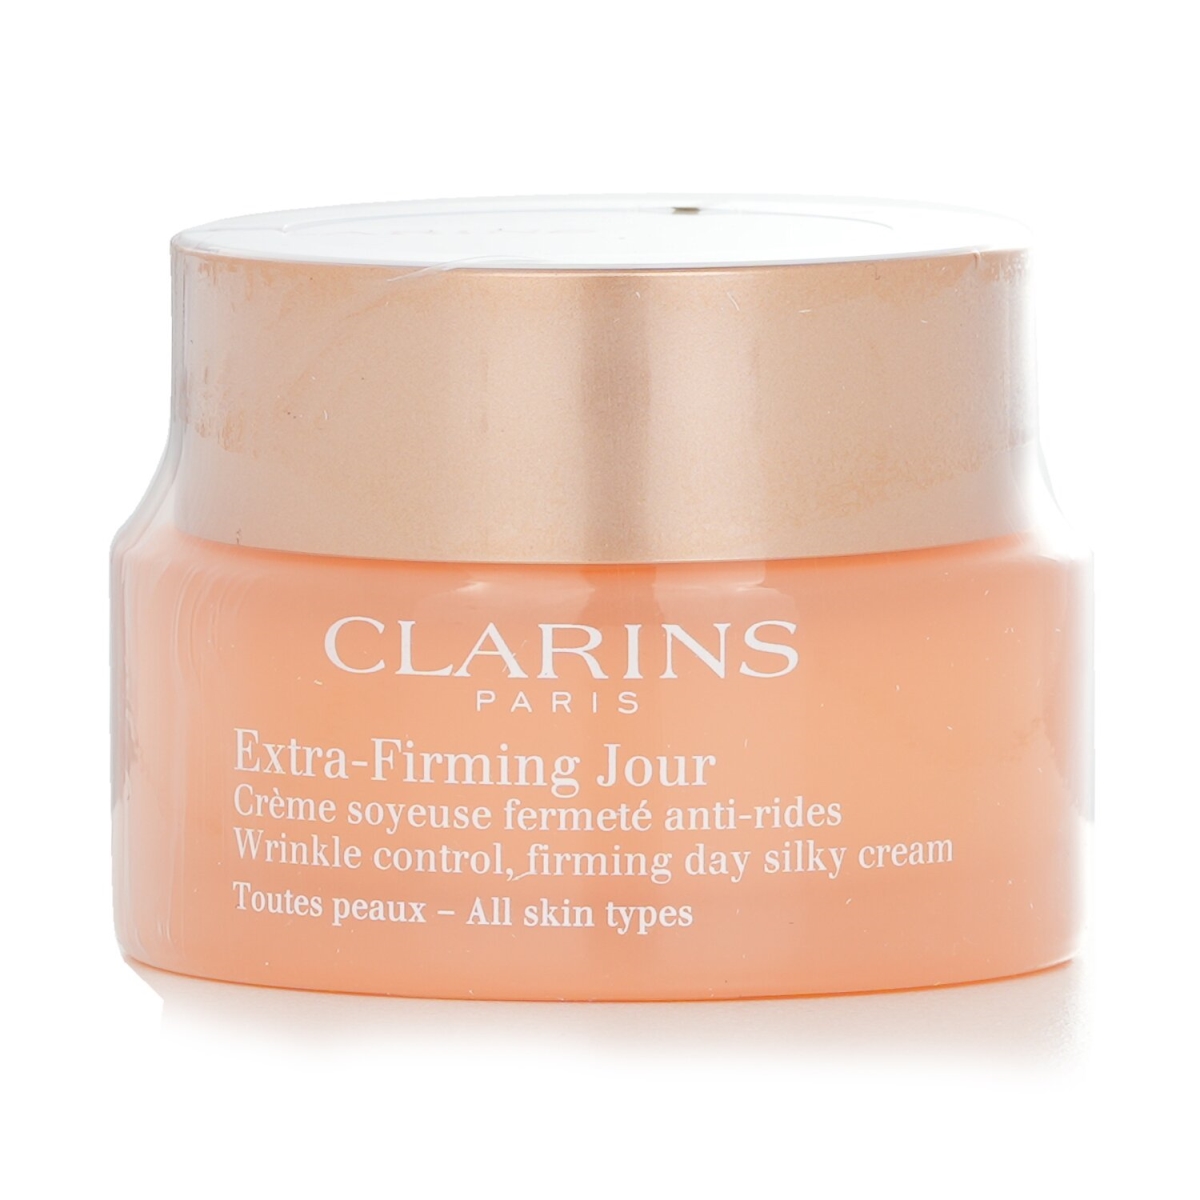 Picture of Clarins 279602 1.7 oz Extra Firming Jour Wrinkle Control, Firming Day Sily Cream for All Skin Types